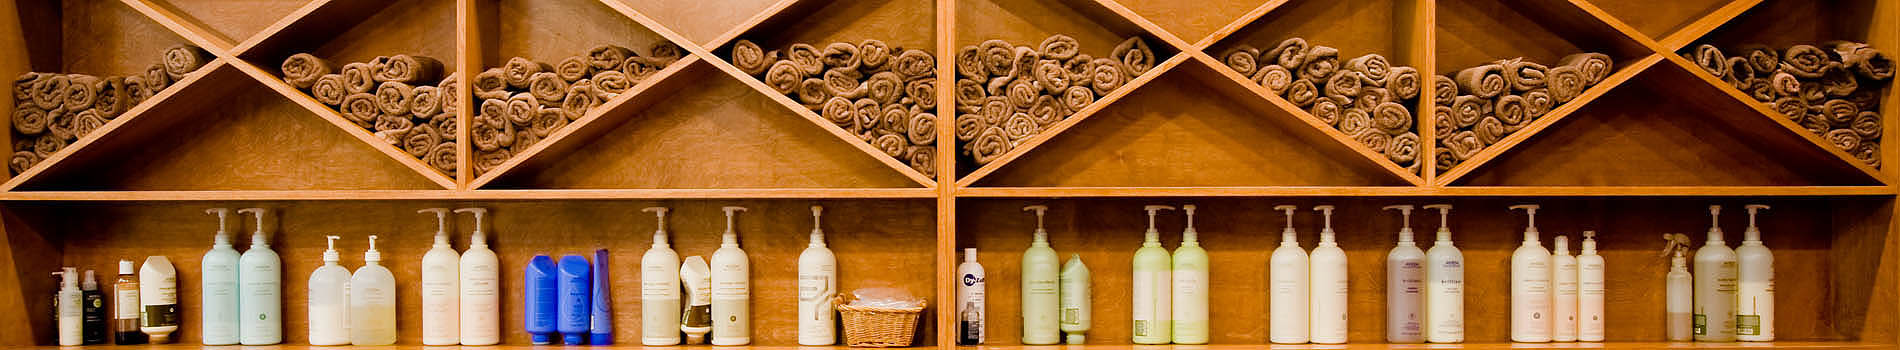 Open wall cabinet in wood. Lower shelf containing shampoo bottles, upper diamond shaped openings with rolled brown towels